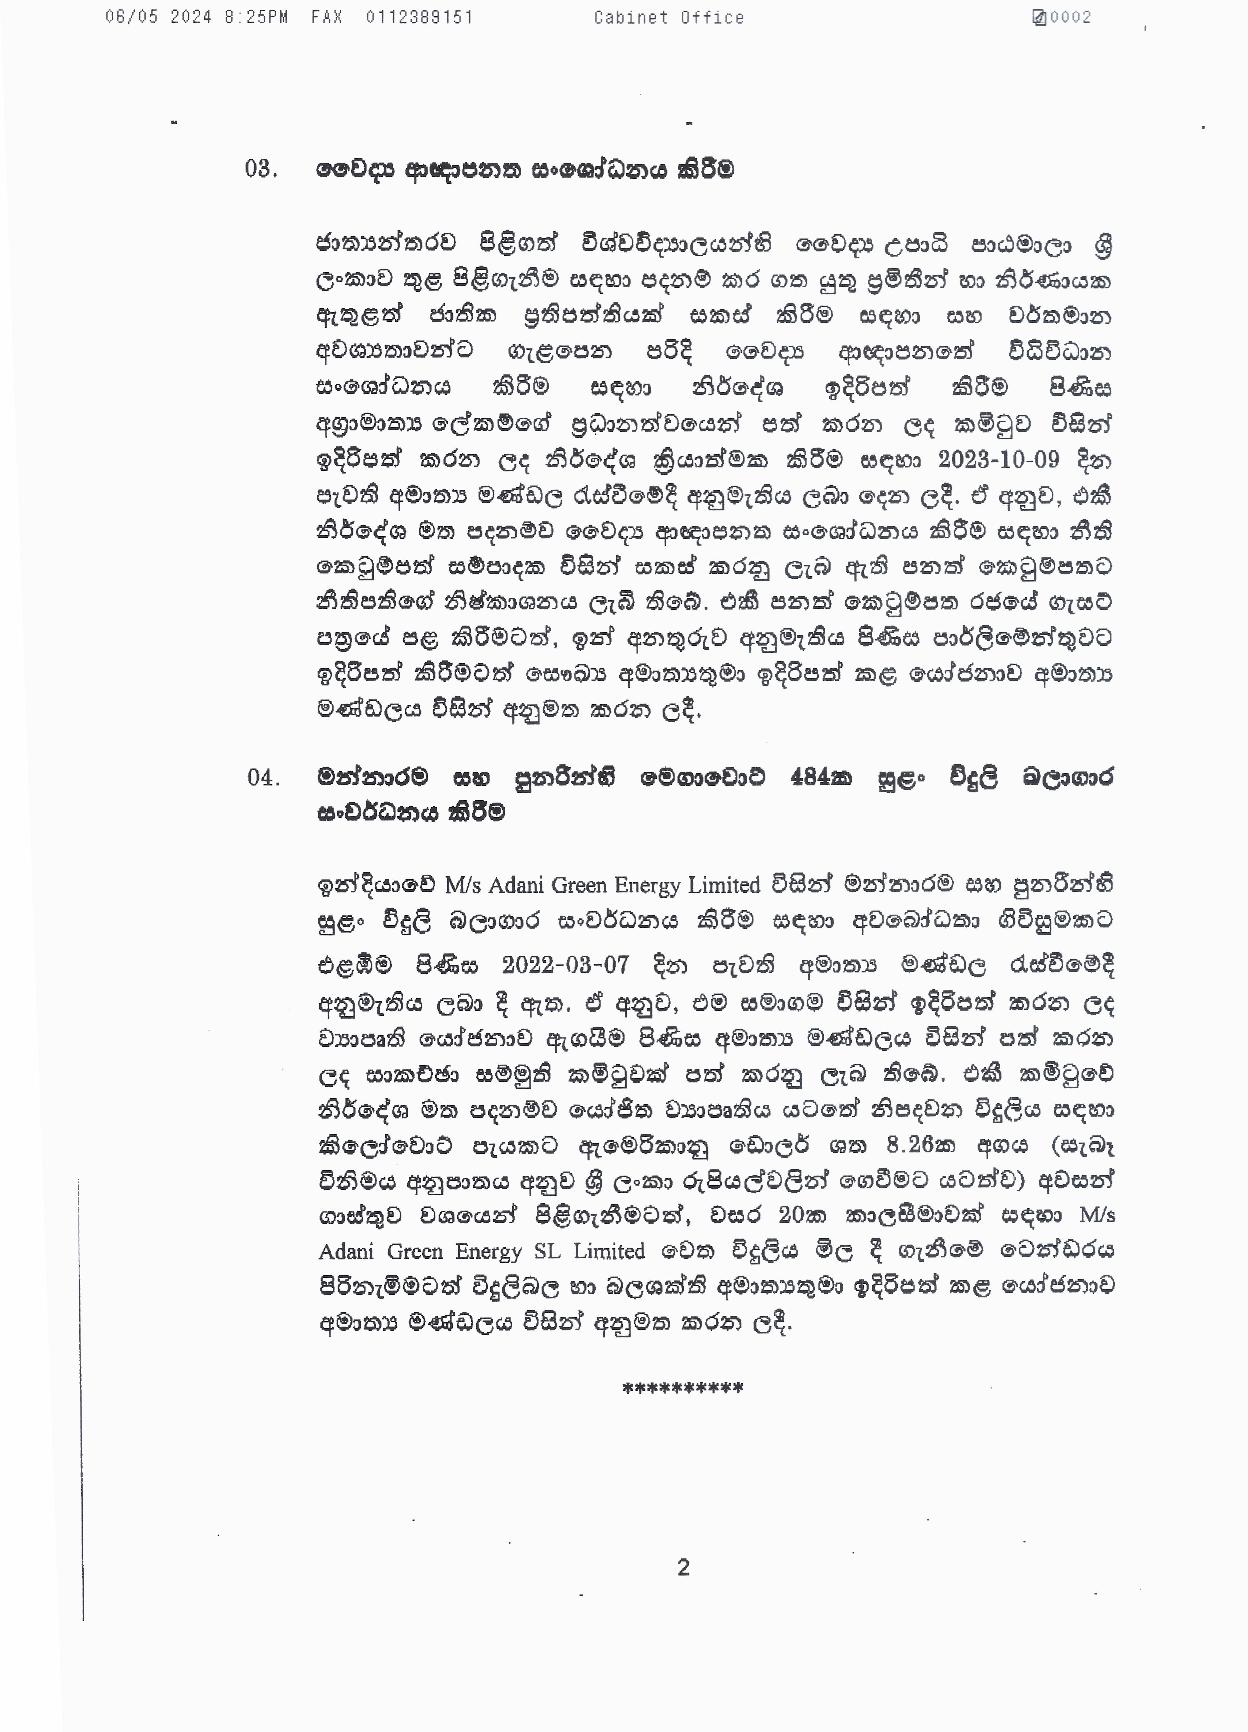 Cabinet Decision on 06.05.2024 page 002